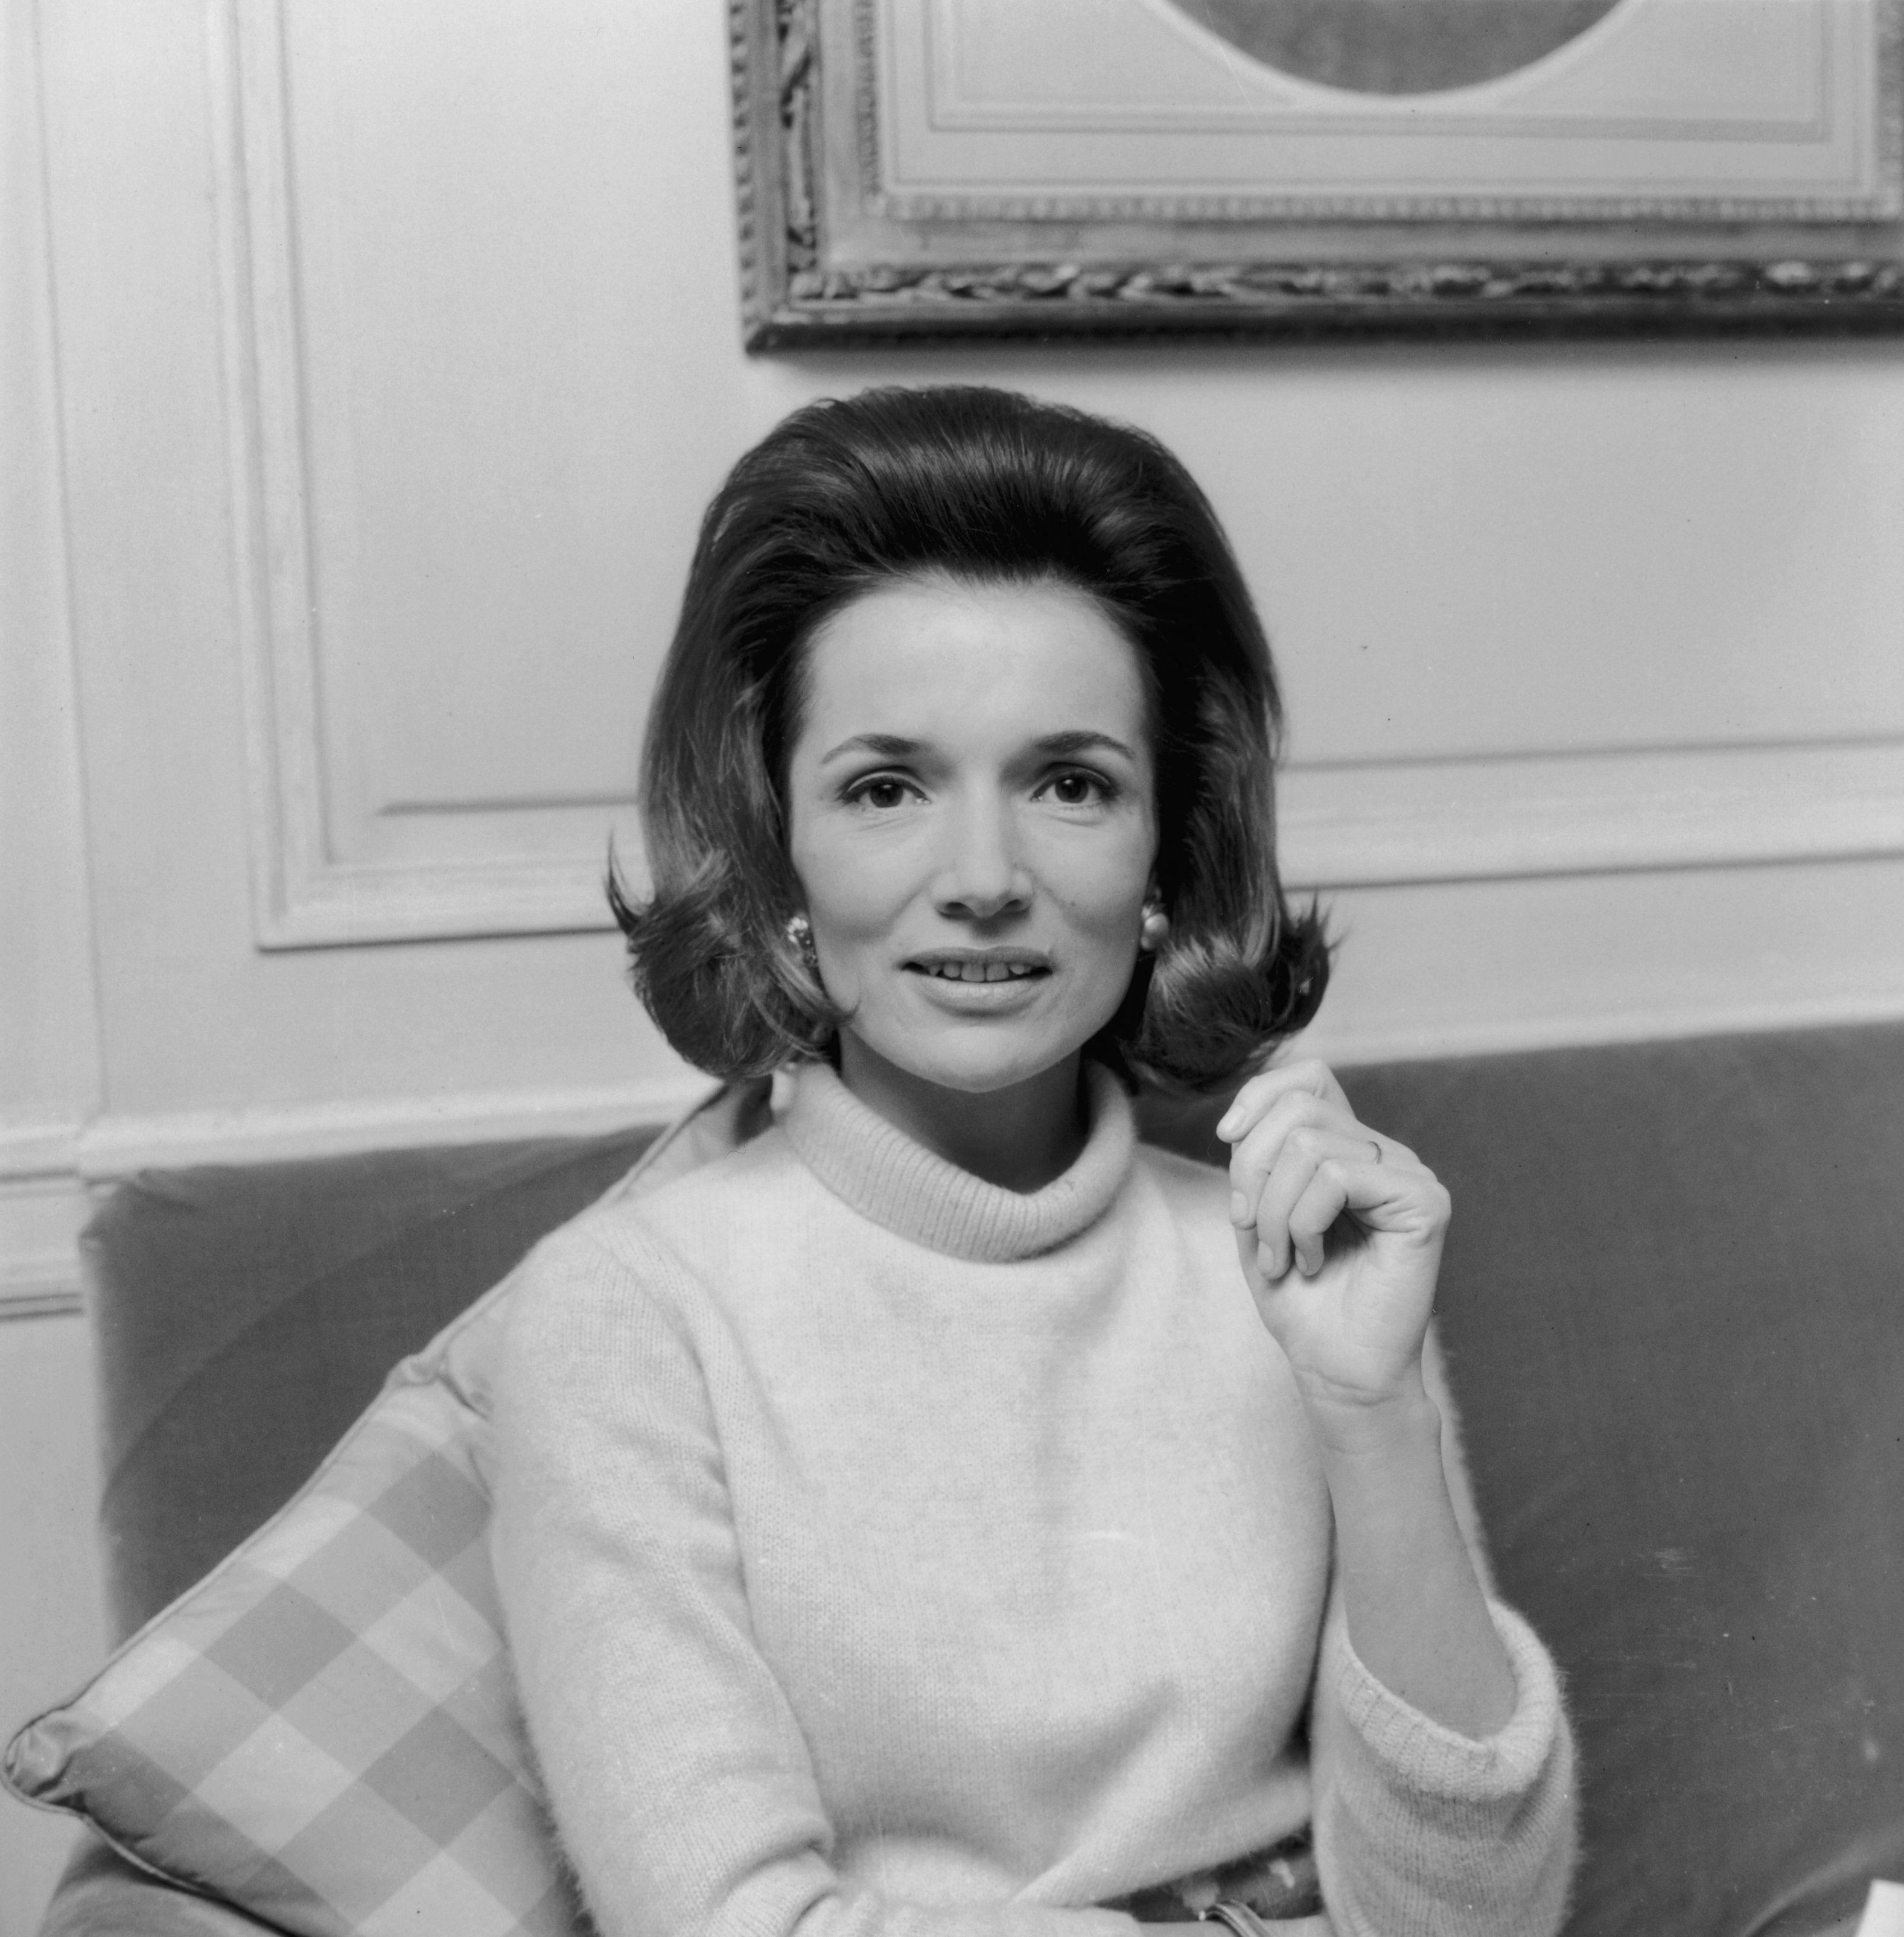 13th June 1967: Princess Lee Radziwill, sister of Jacqueline Kennedy. | Source: Getty Images